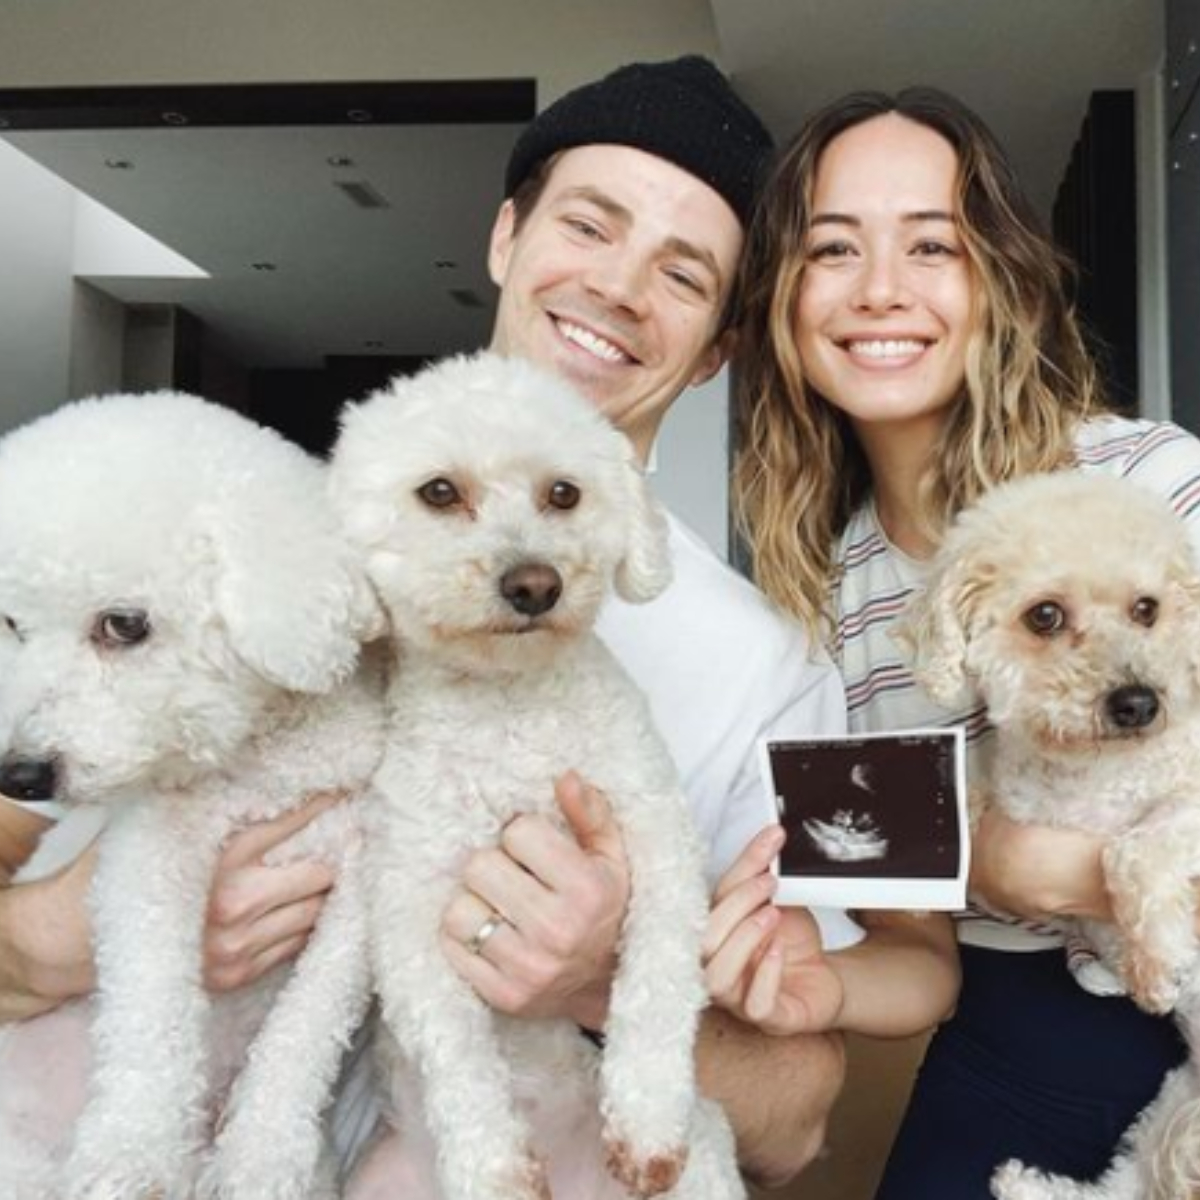 Grant Gustin and wife LA Thoma recently welcomed their first baby 